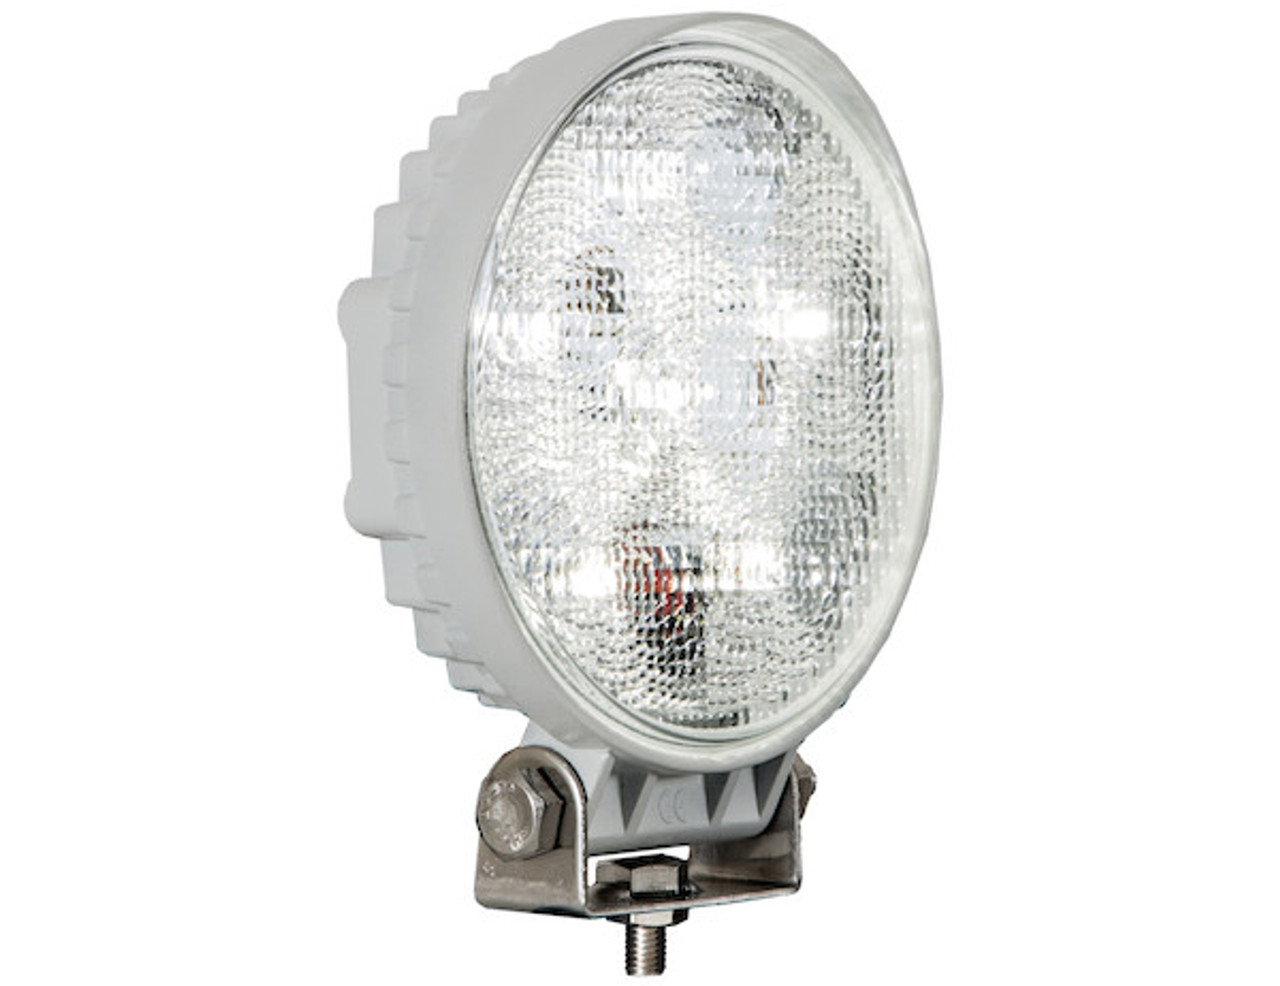 1493215 - 4.5 Inch Clear LED Flood Light with White Housing